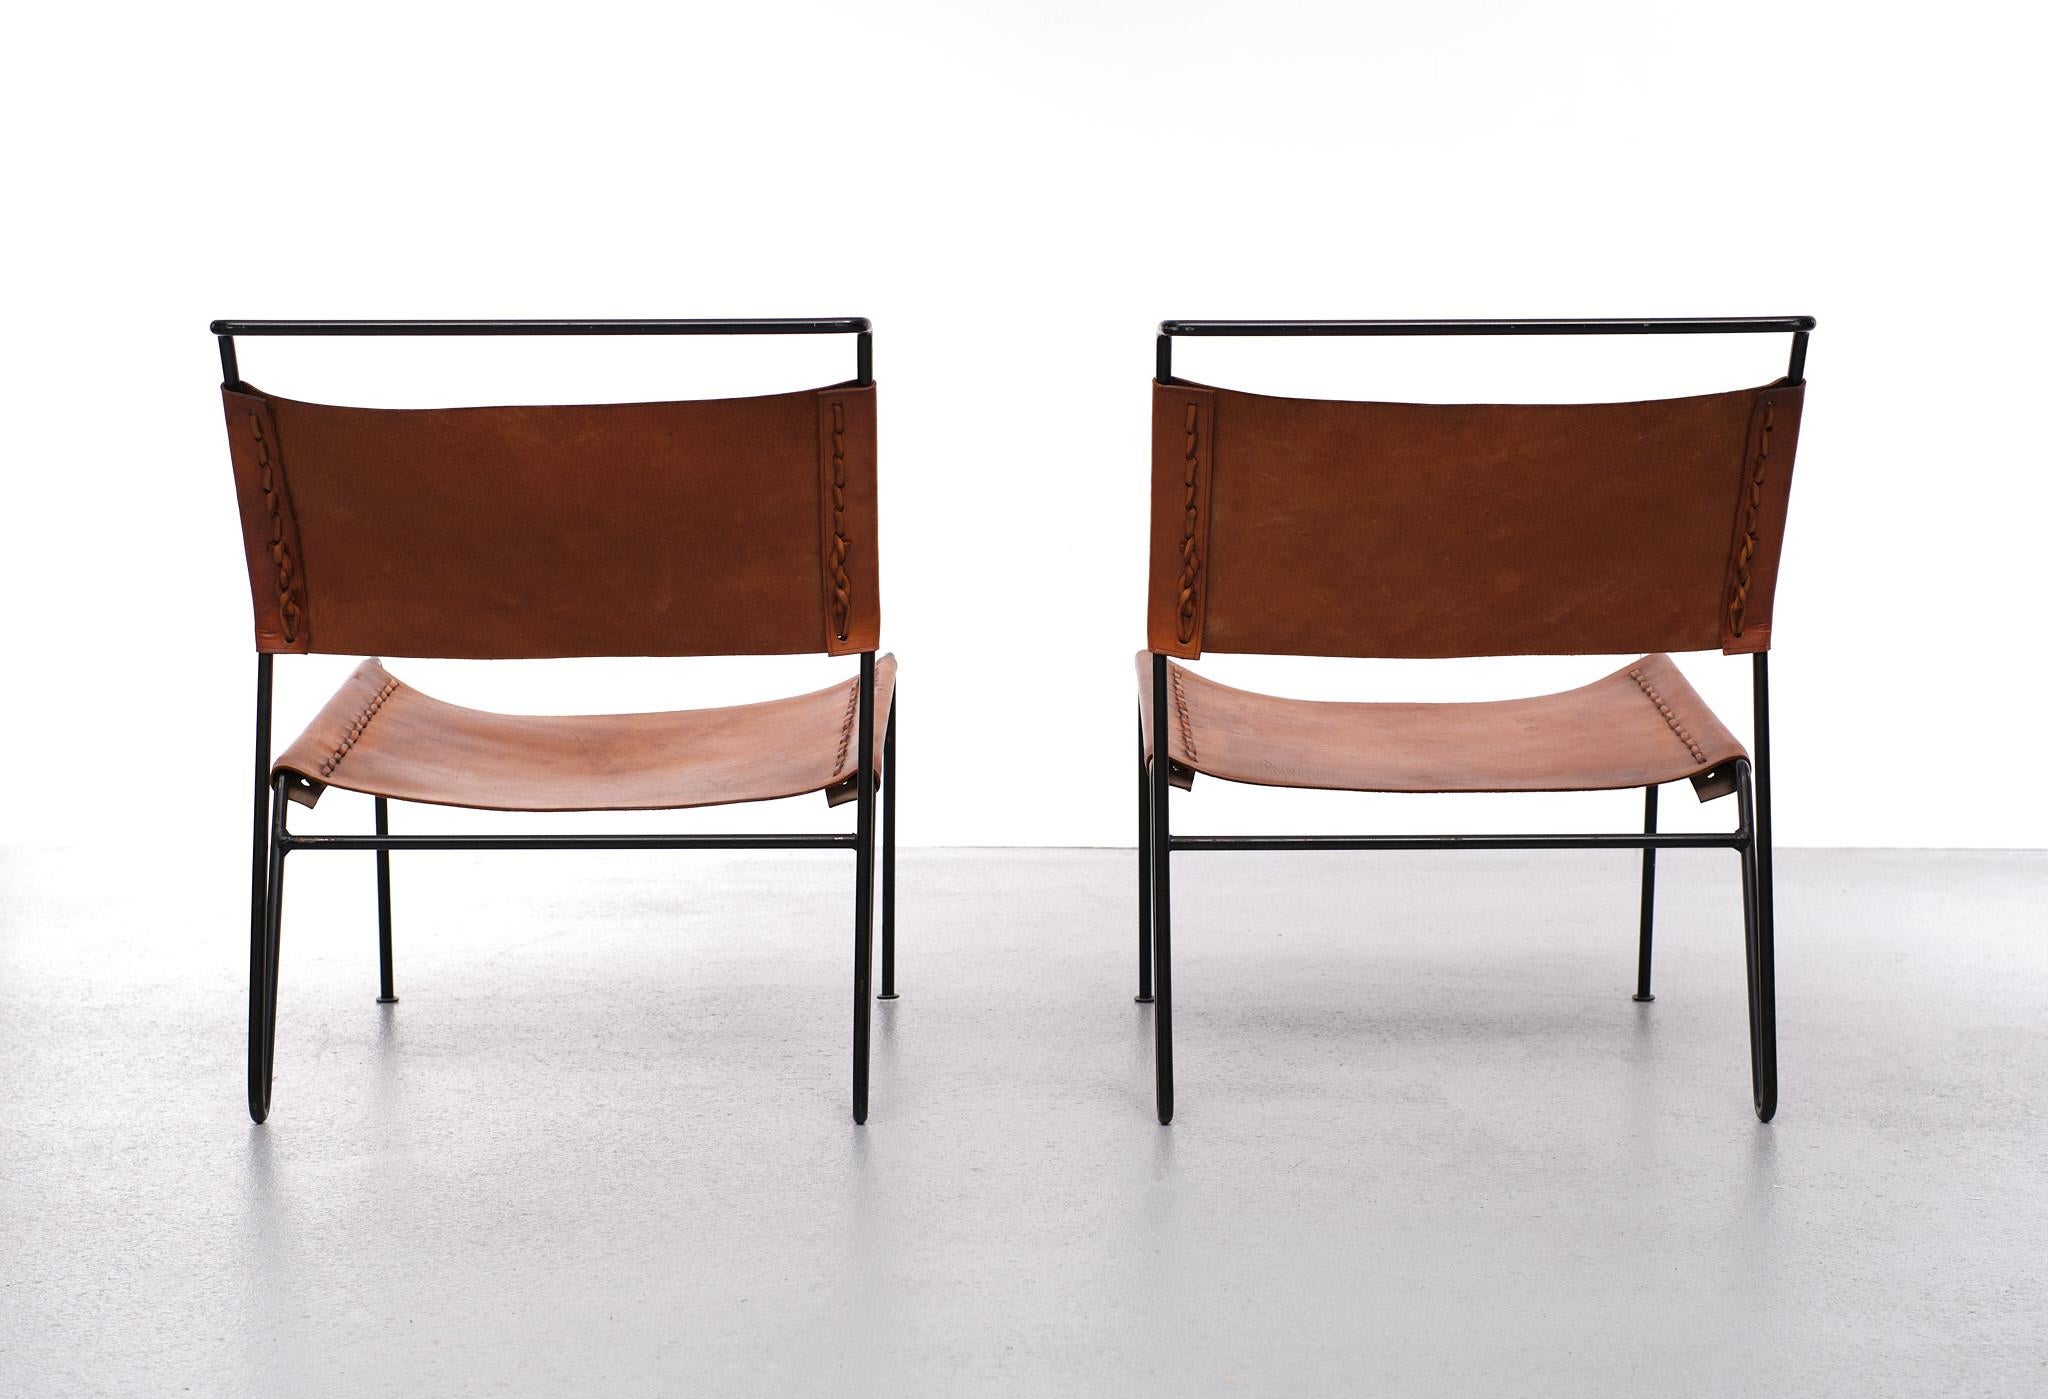 Leather Pair of A. Dolleman Chairs for Metz & Co, Netherlands, 1950 For Sale